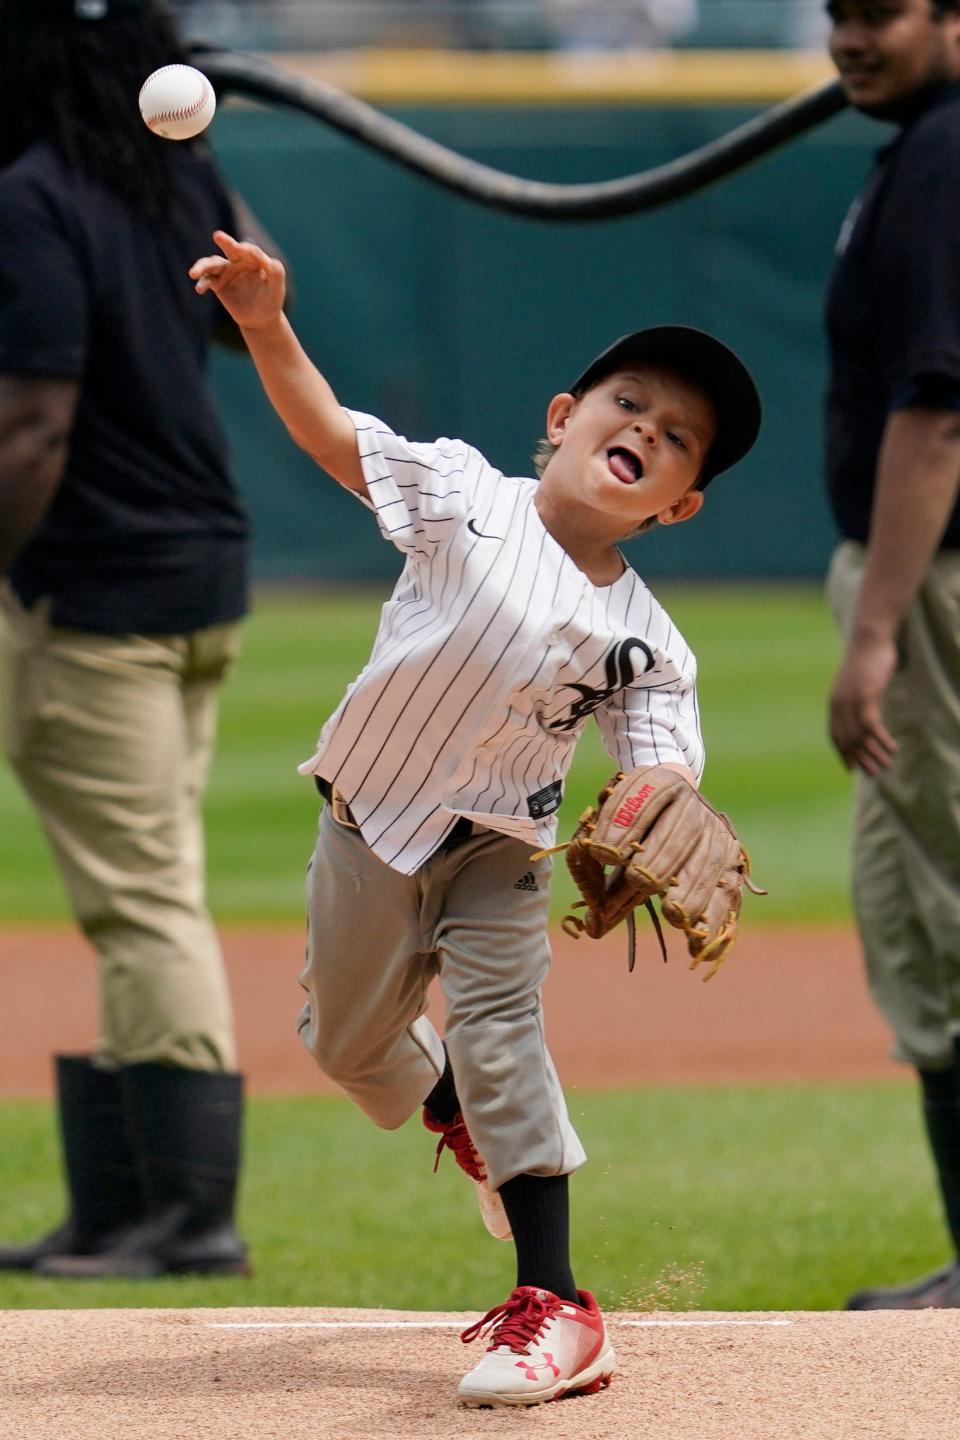 Beau Dowling throws out a ceremonial first pitch before a baseball game between the Baltimore Orioles and the Chicago White Sox in Chicago, Saturday, June 25, 2022. (AP Photo/Nam Y. Huh)